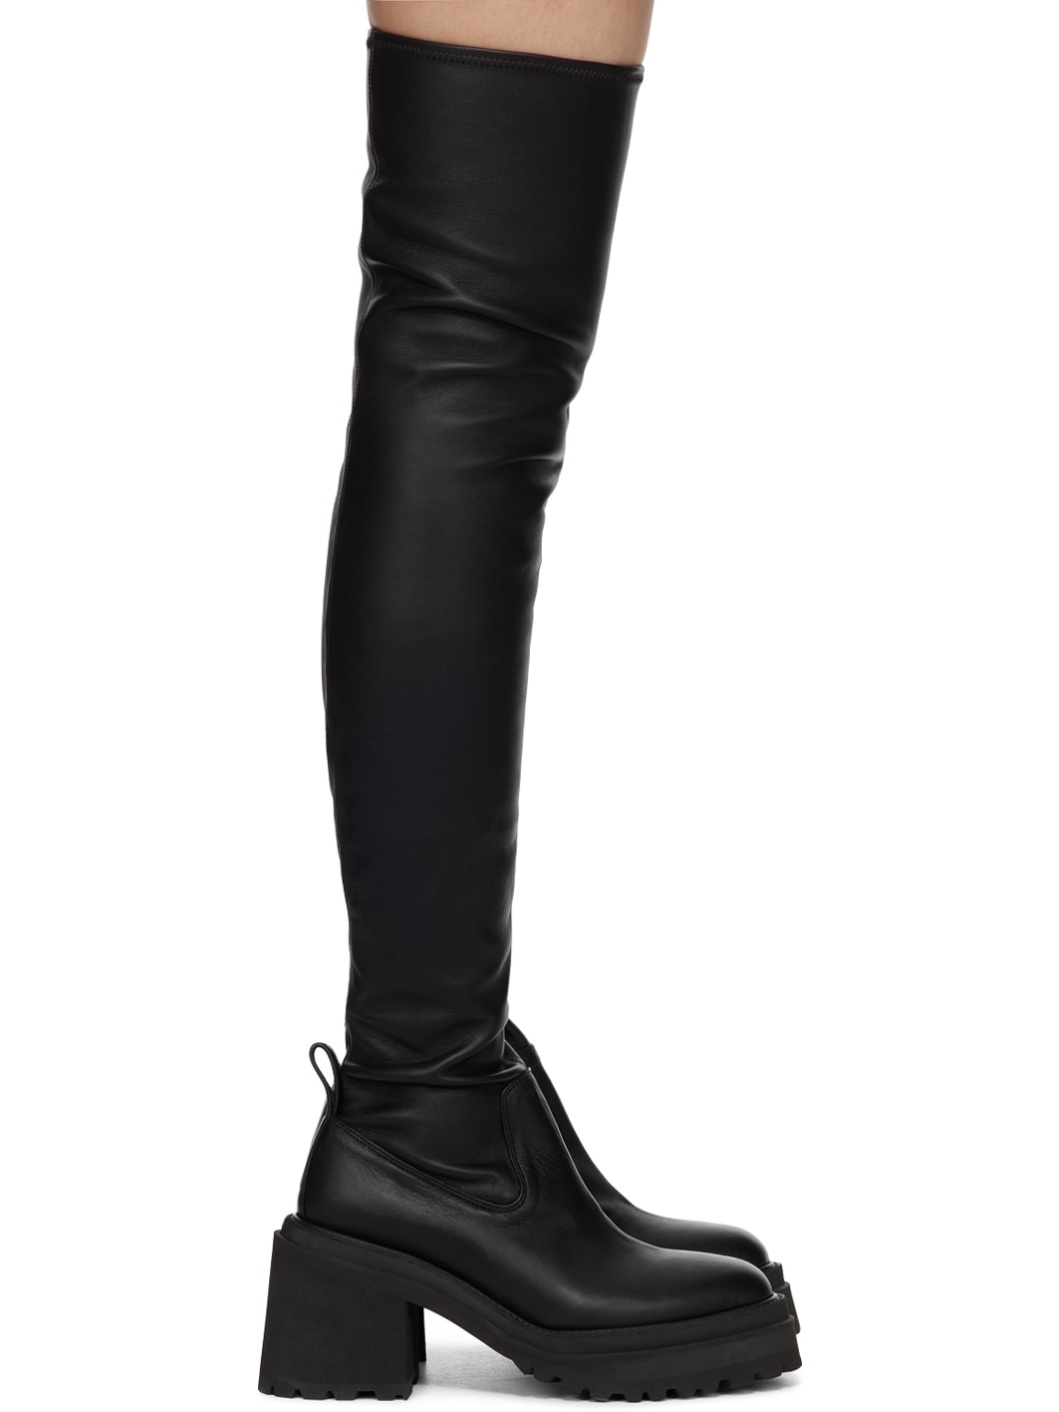 Black Leather Tall Boots - 1